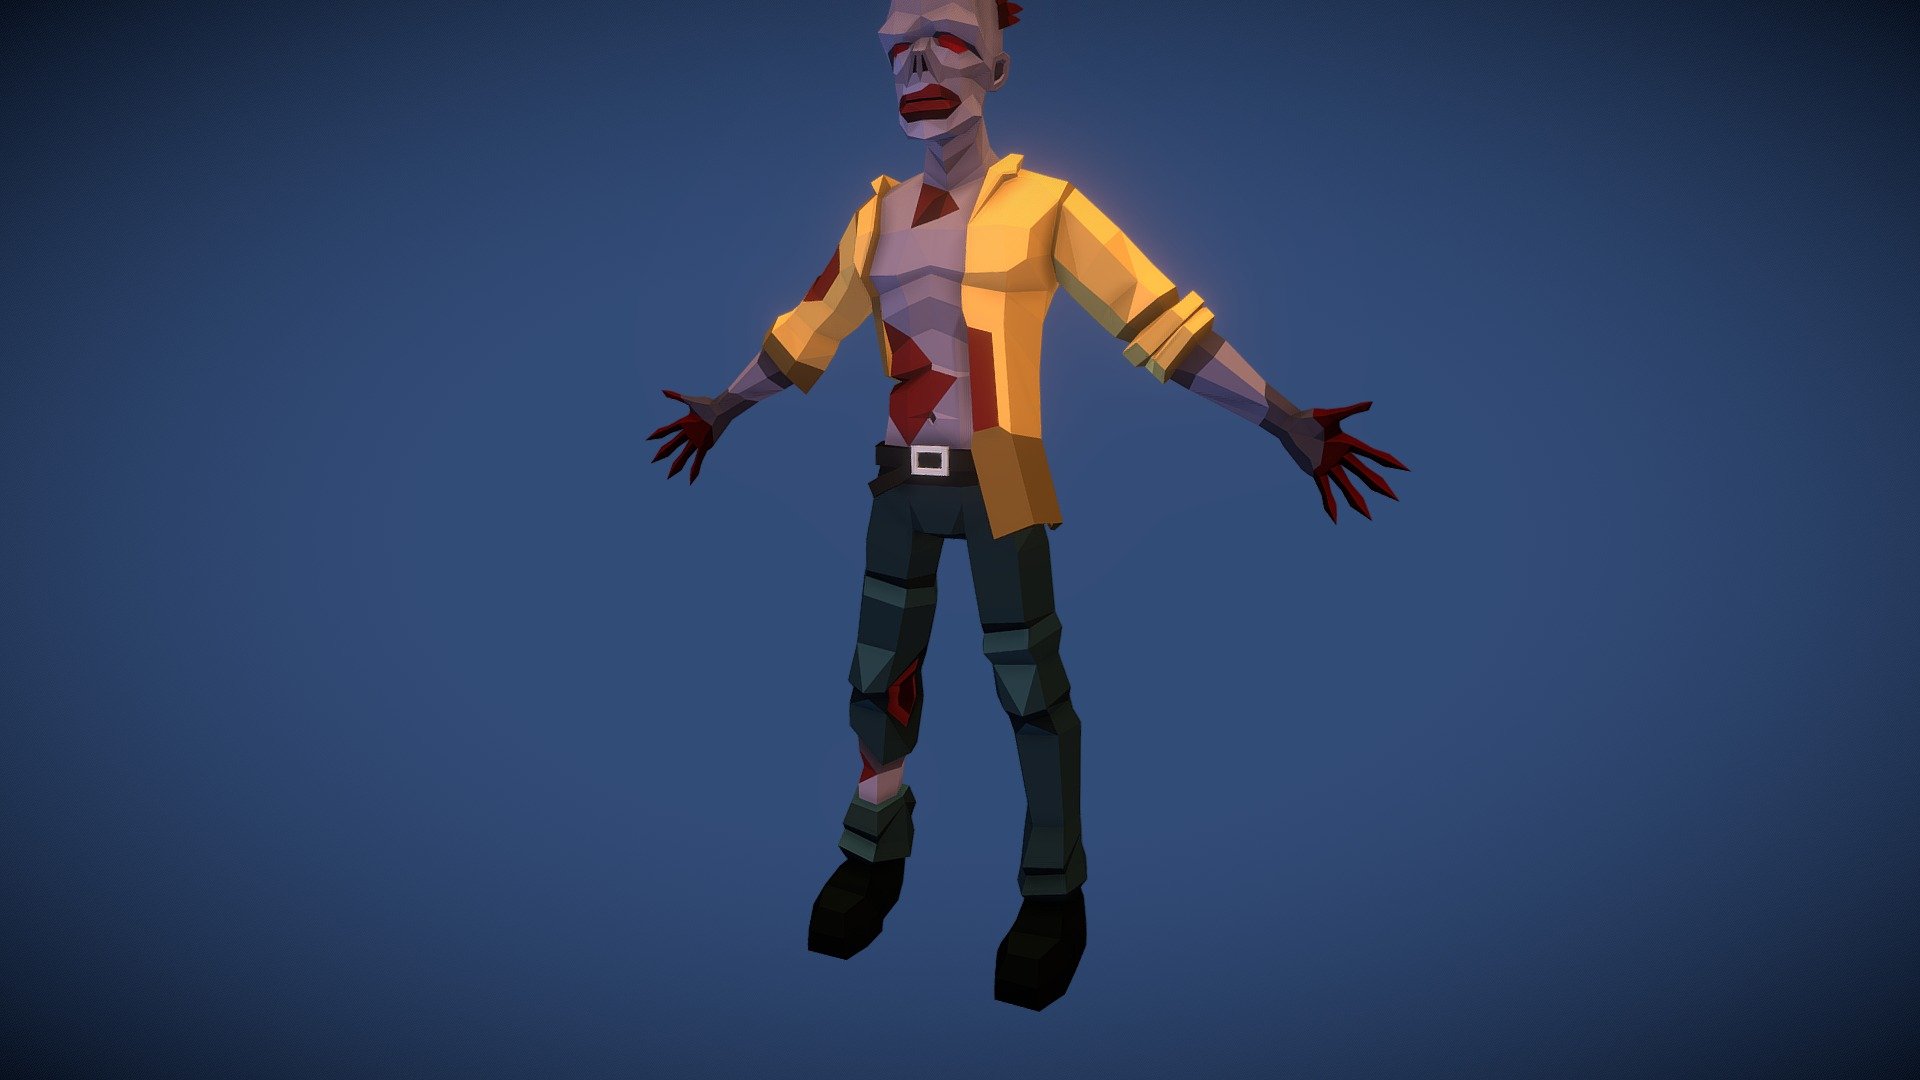 Zombie Low Poly 3d Model By Frost2511 [68f7b07] Sketchfab